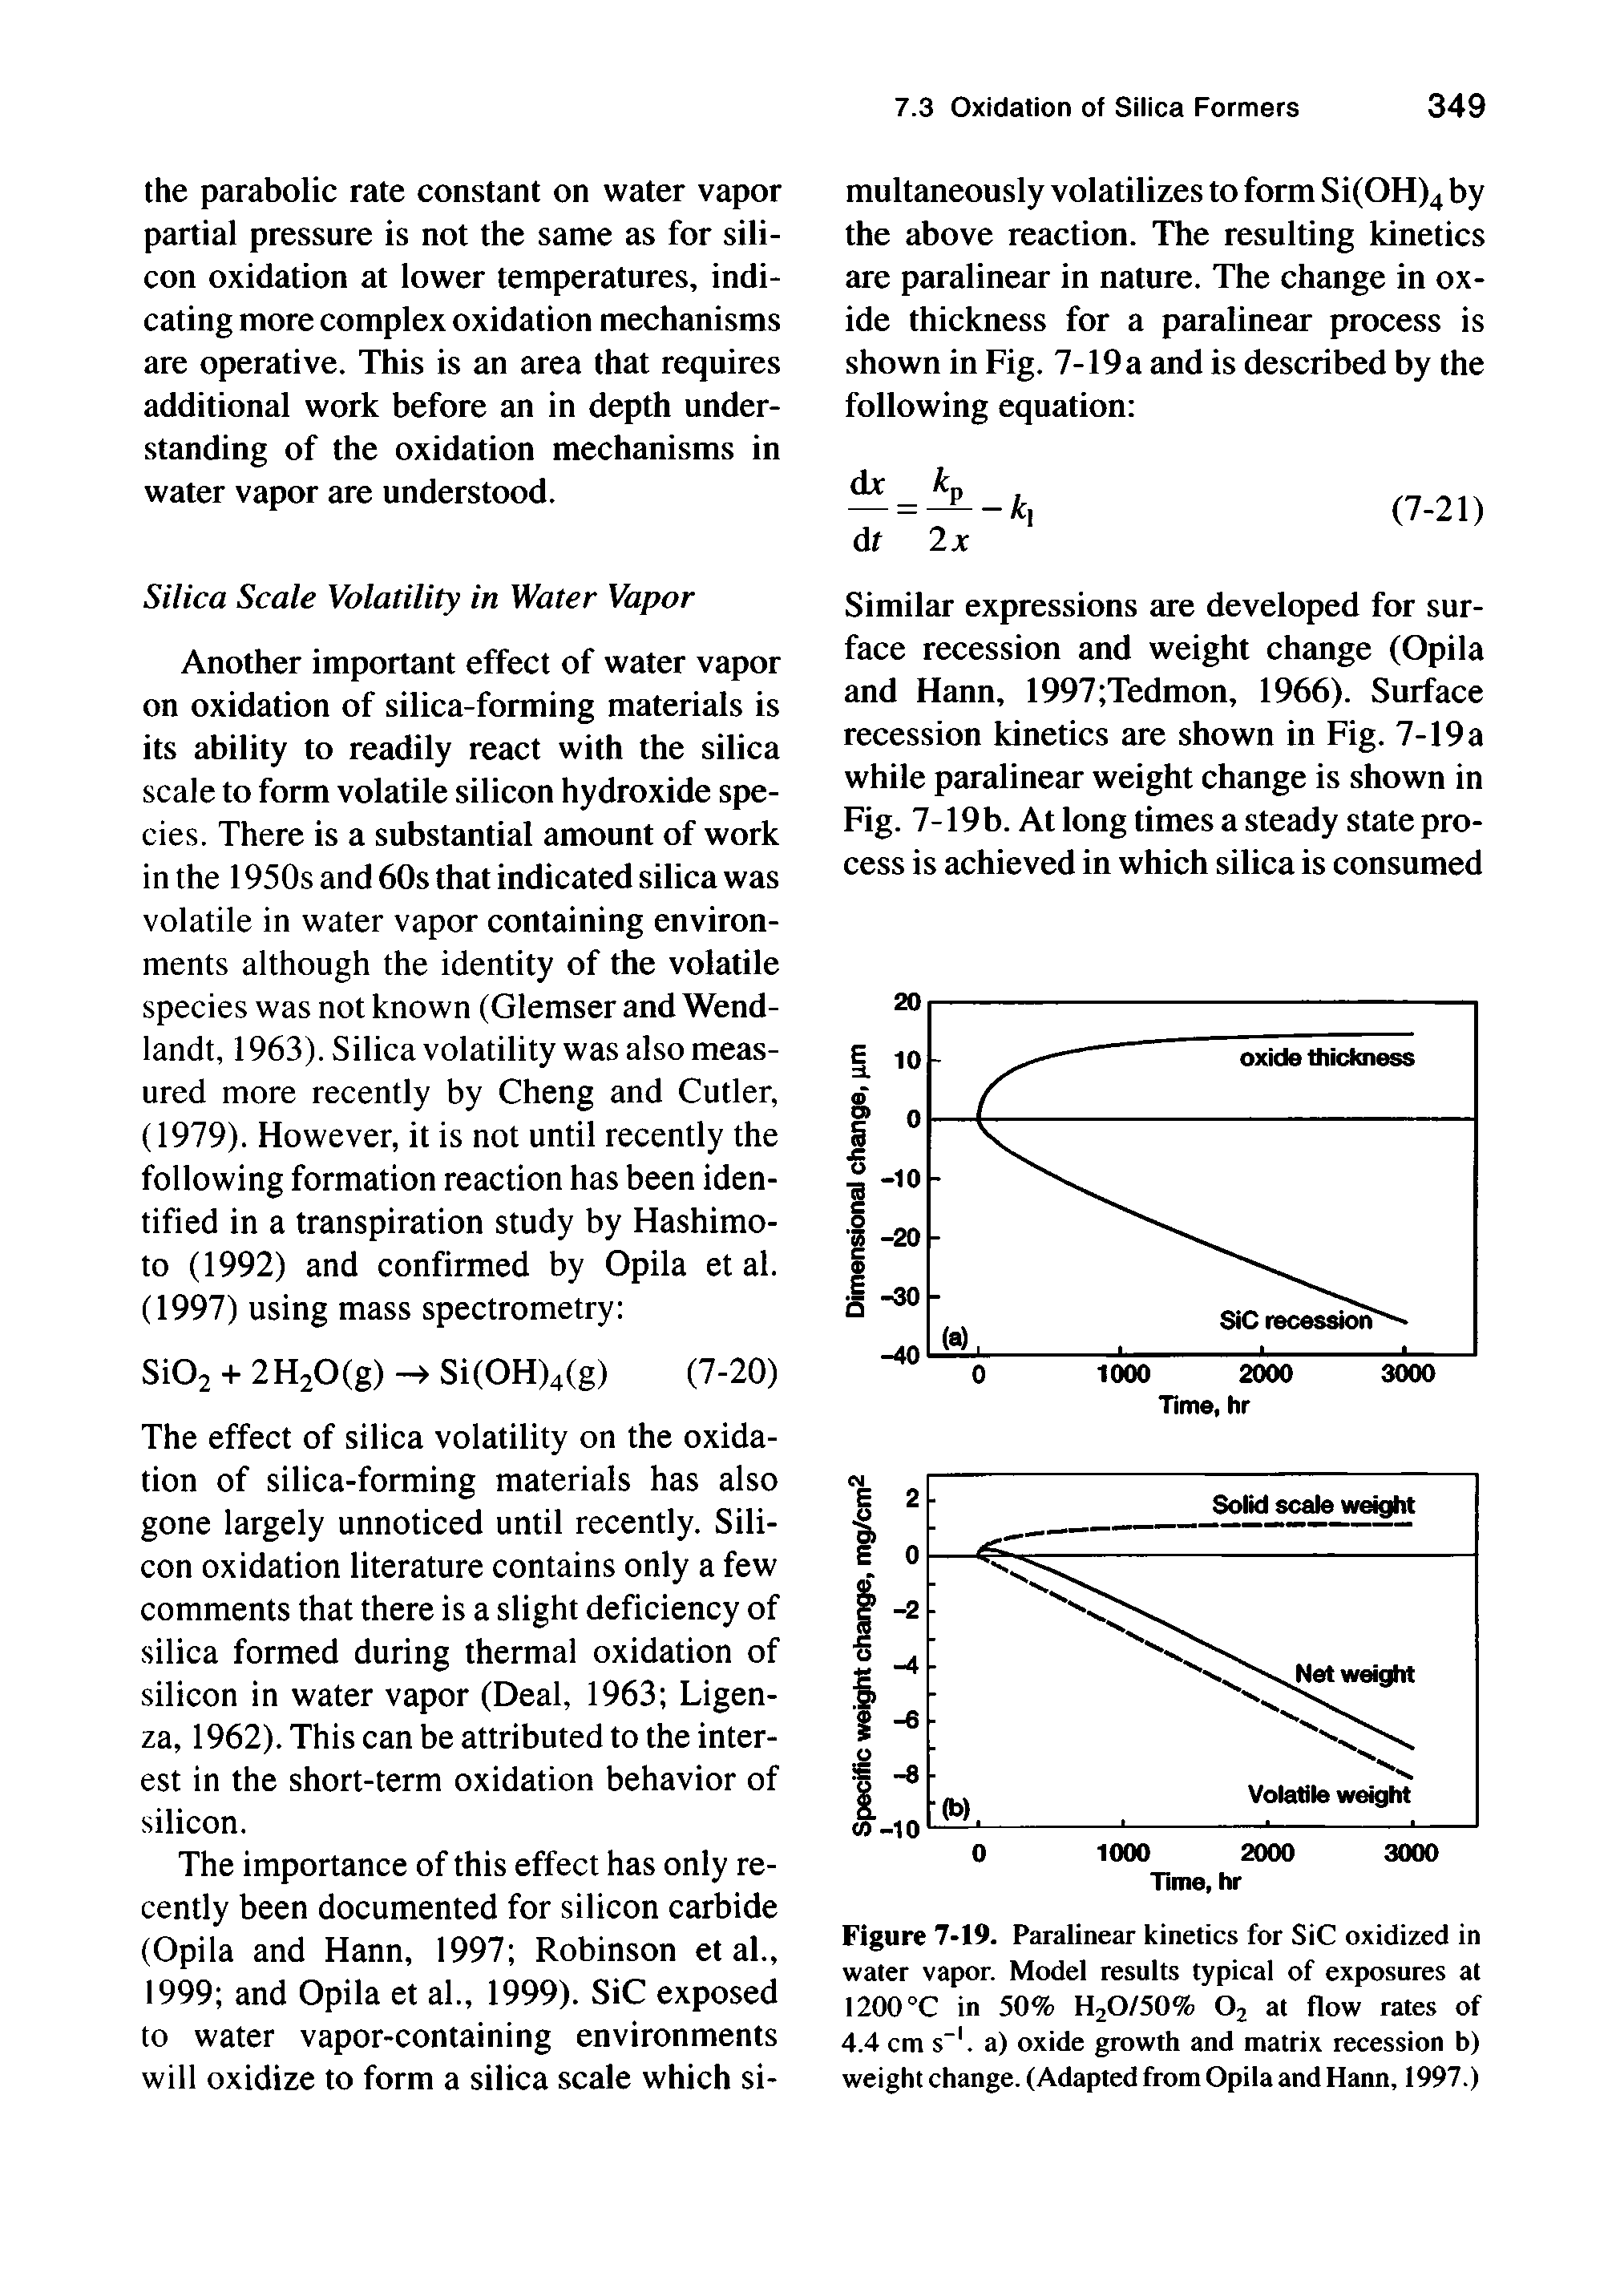 Figure 7-19. Paralinear kinetics for SiC oxidized in water vapor. Model results typical of exposures al I200°C in 50% H2O/50% Oj at flow rates of 4.4 cm s. a) oxide growth and matrix recession b) weight change. (Adapted from Opila and Hann, 1997.)...